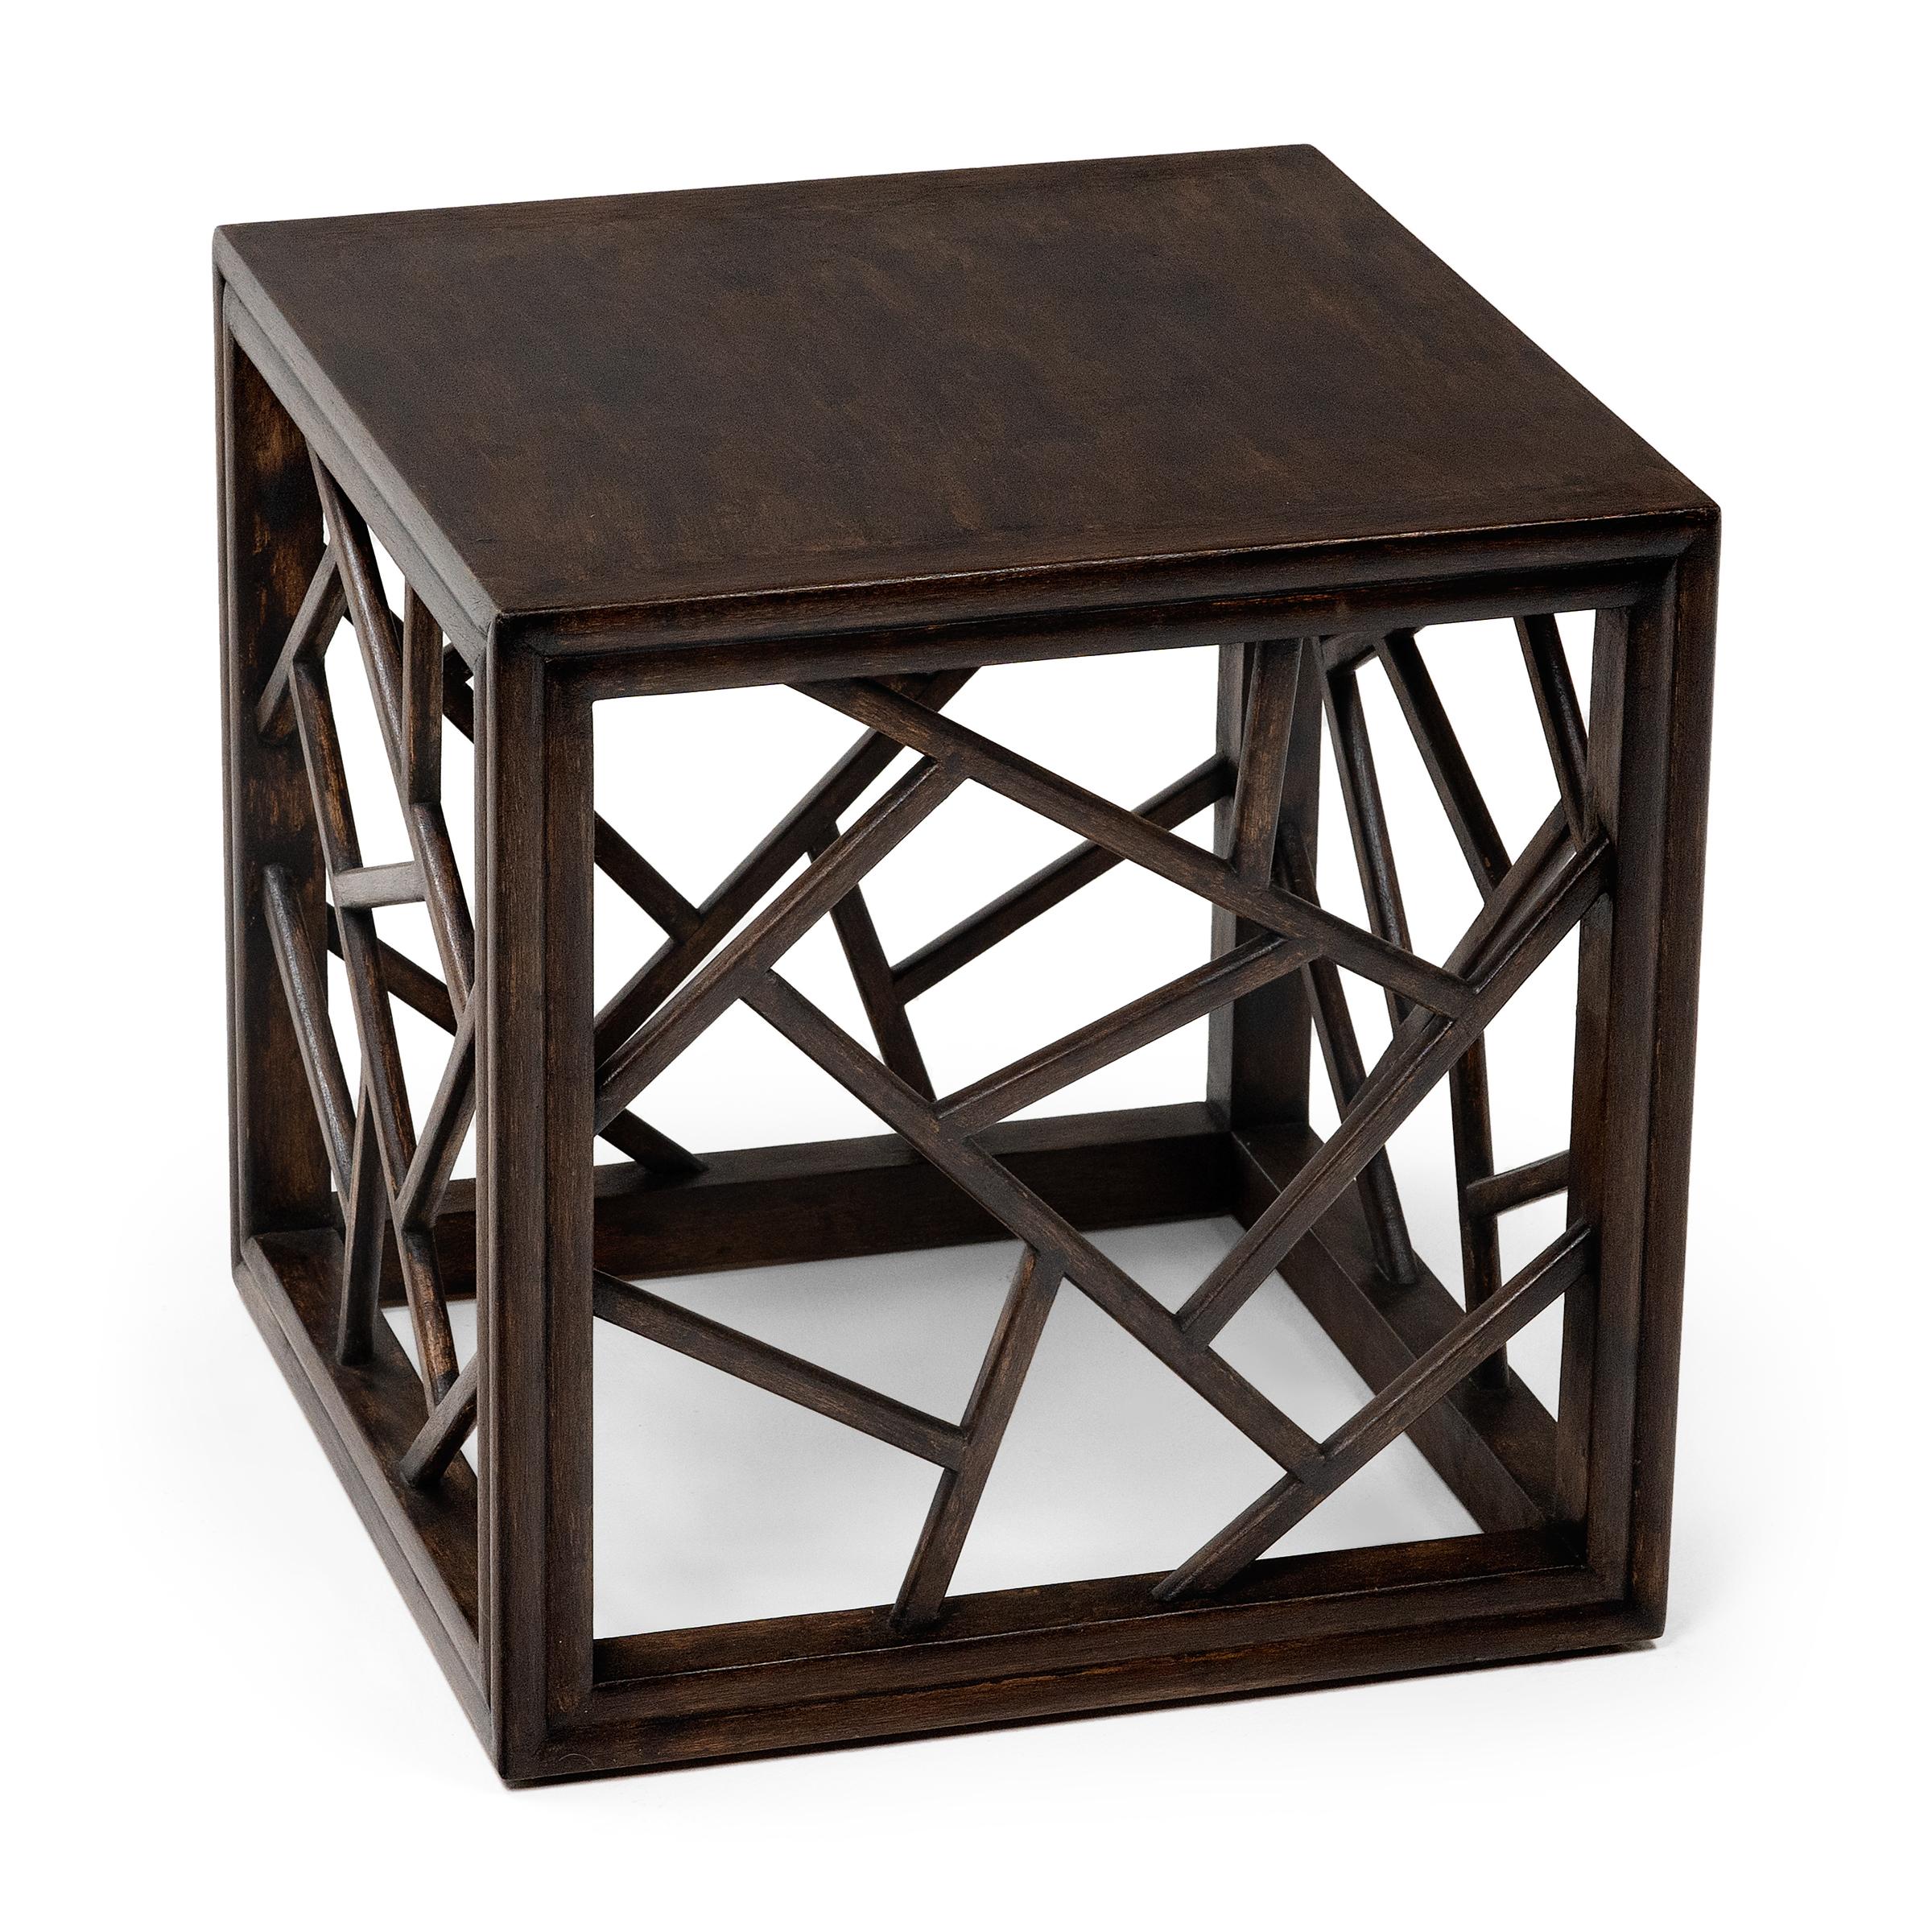 20th Century Chinese Cracked Ice Square Table, c. 1900 For Sale